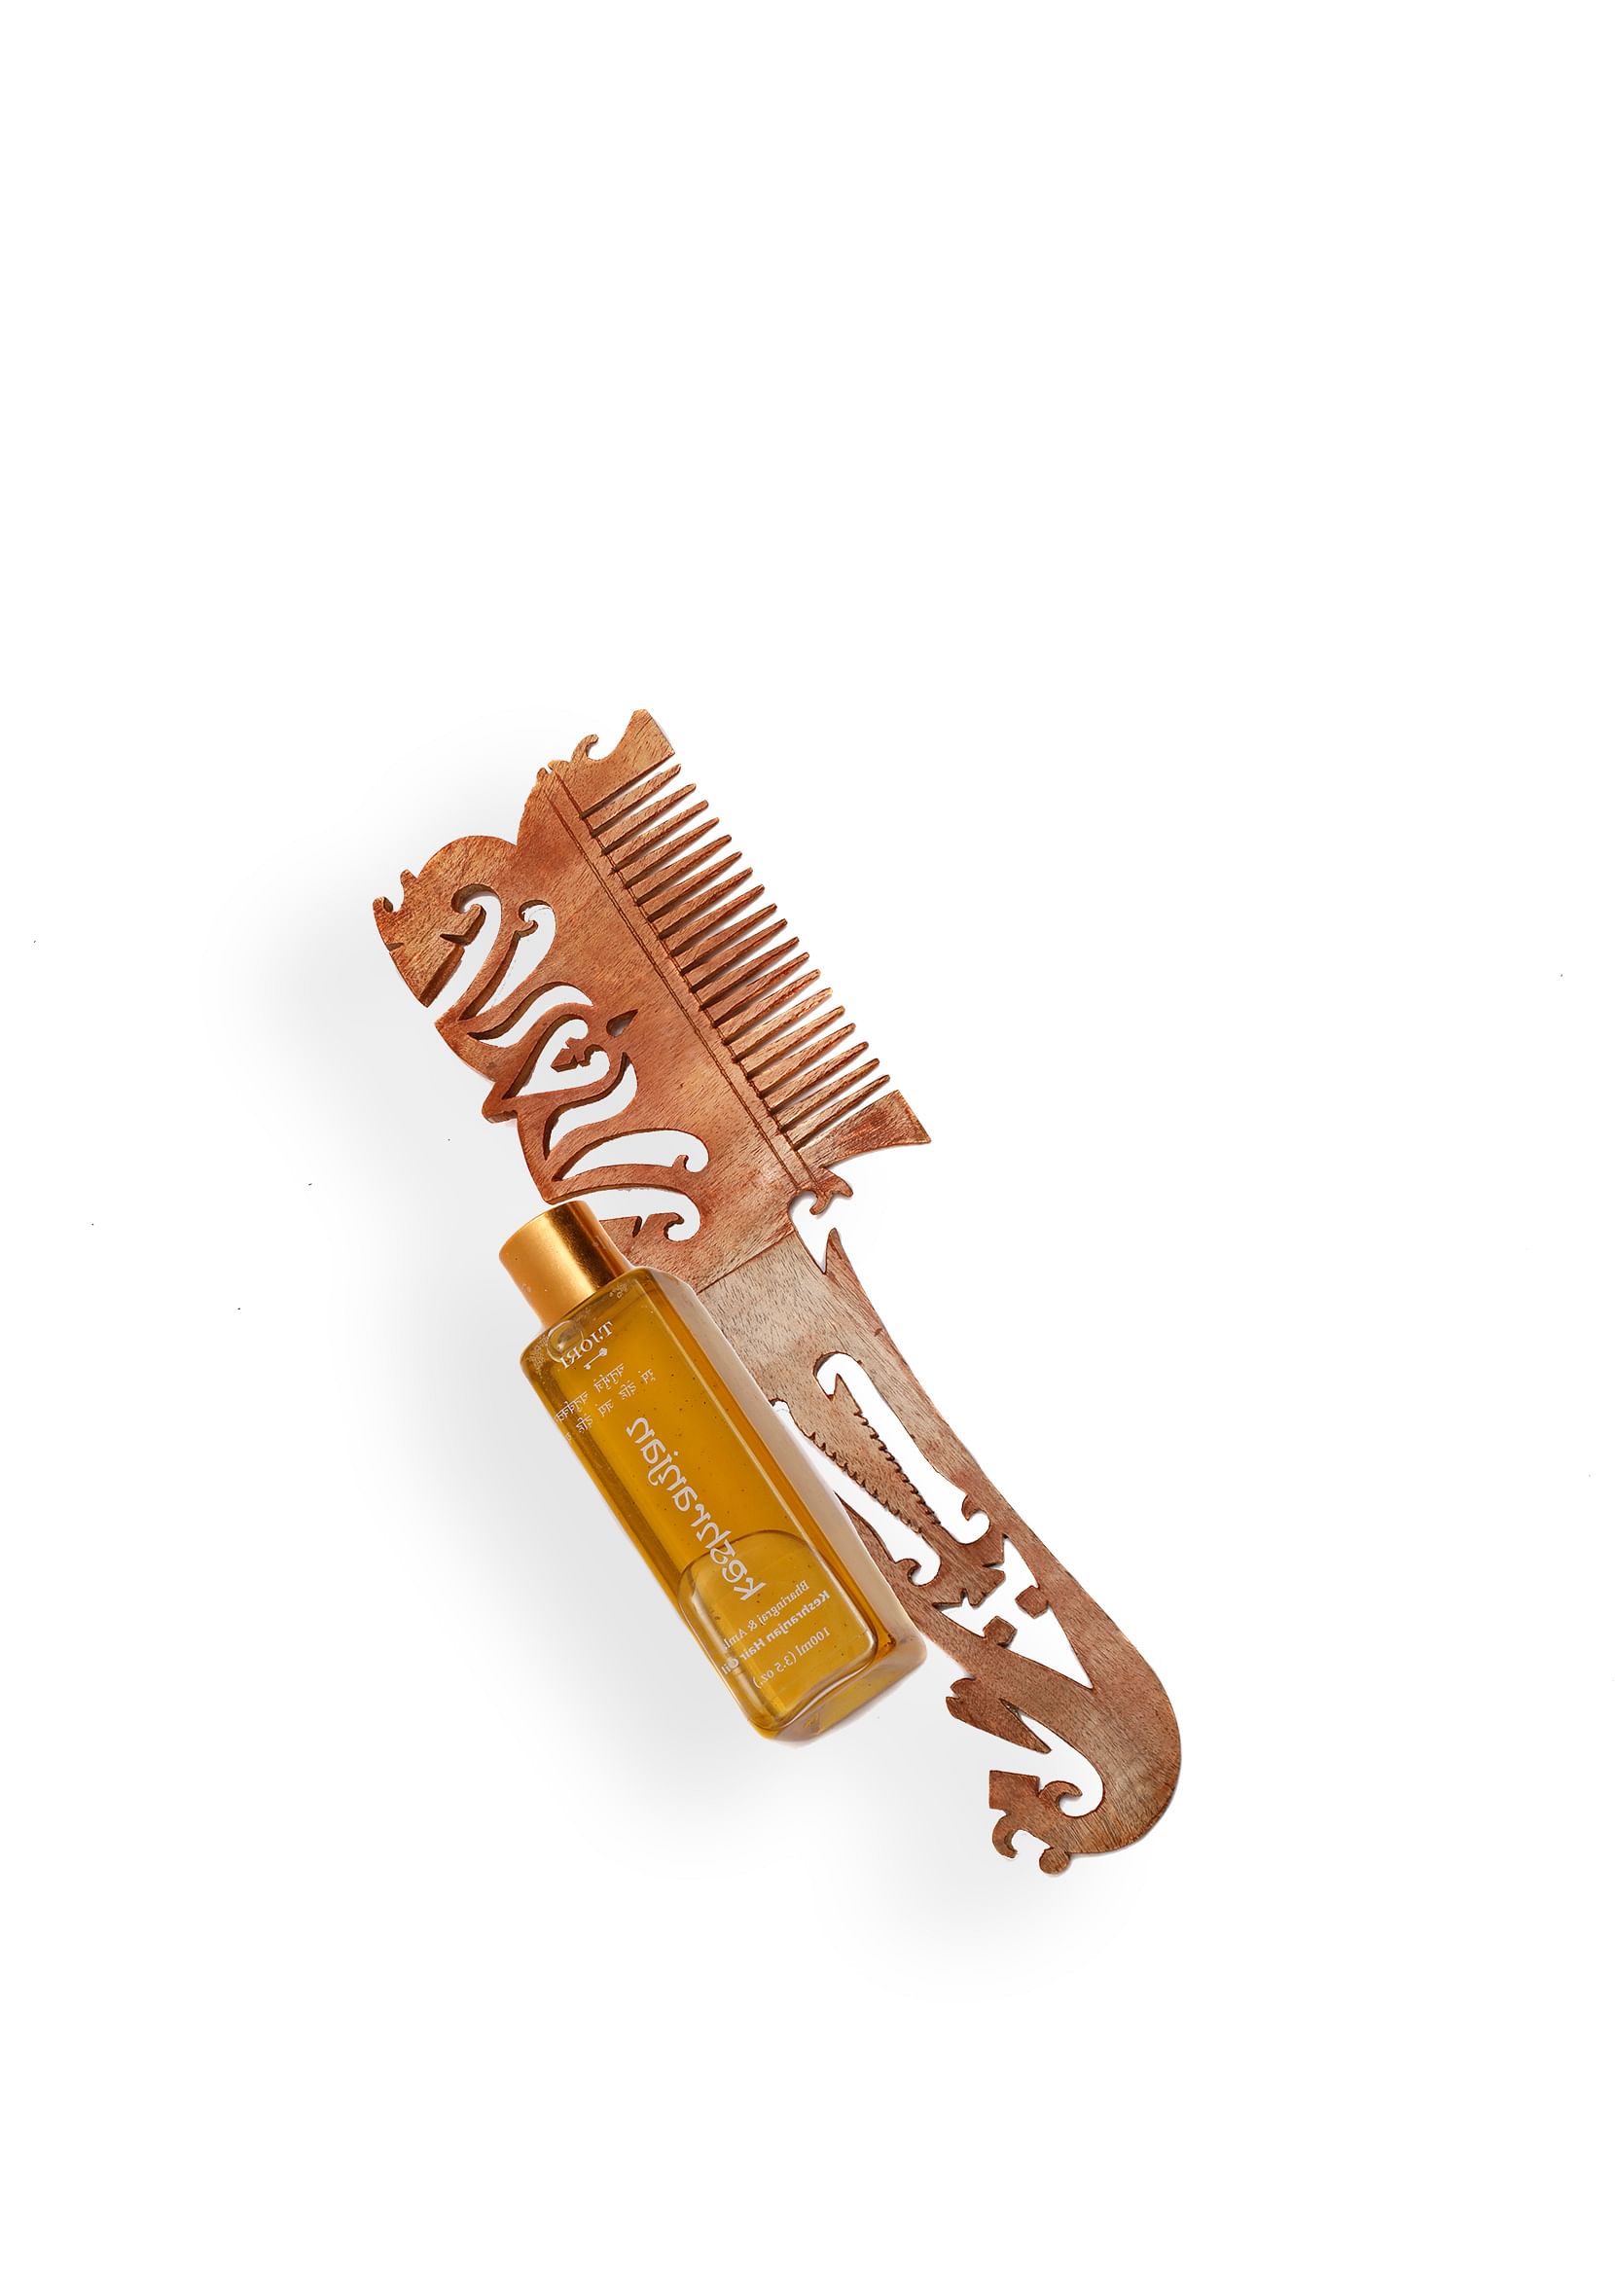 Comb & Hair Oil Combo